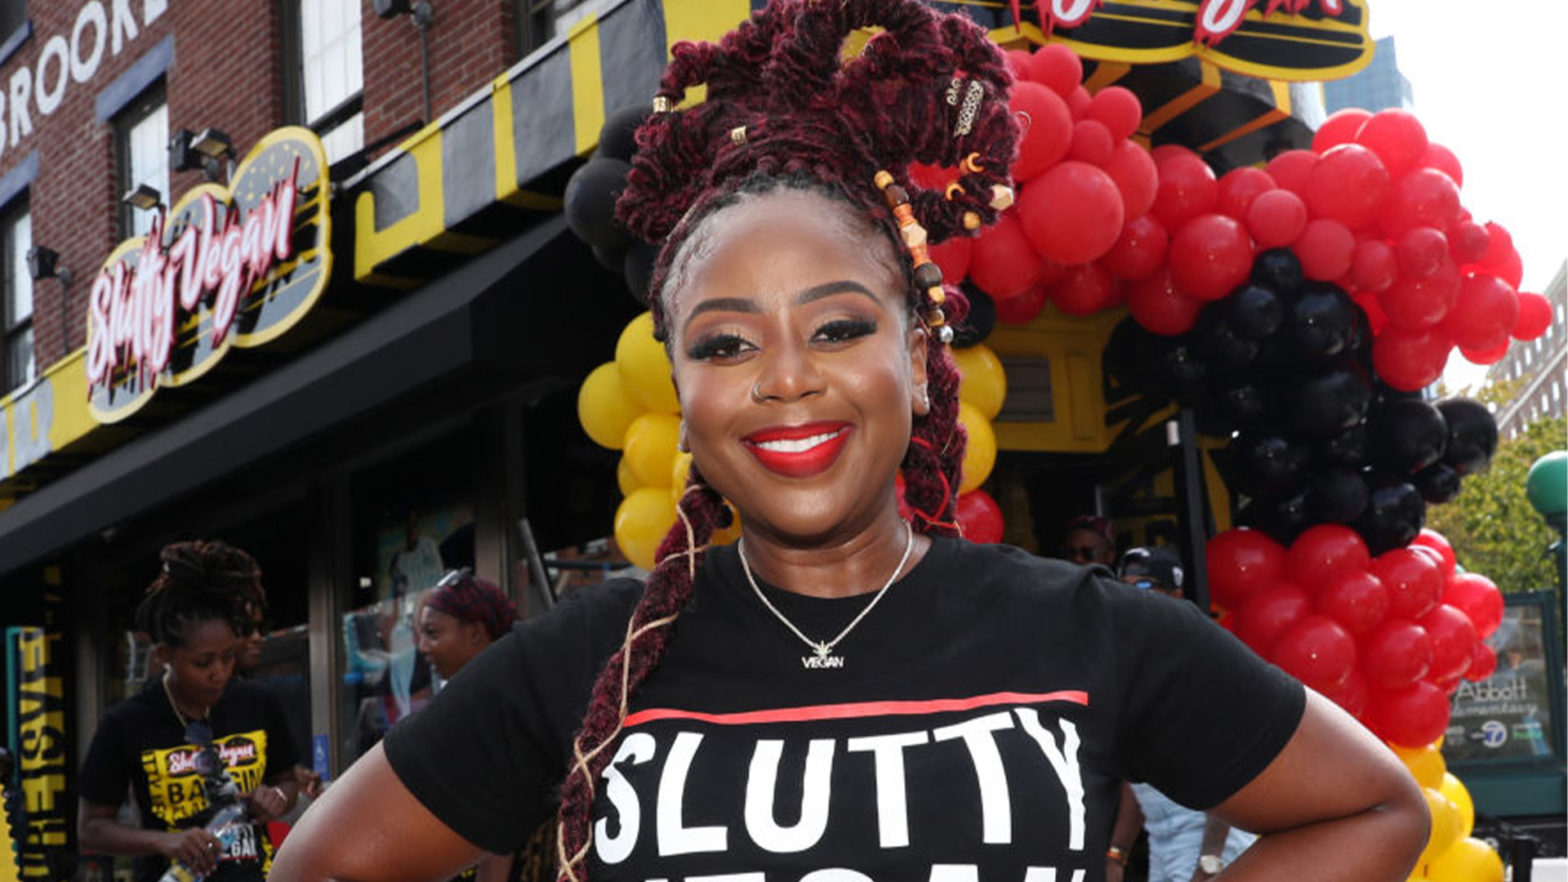 Pinky Cole Celebrates Slutty Vegan's Fifth Anniversary With The Announcement Of Her 13th Location Coming To An HBCU